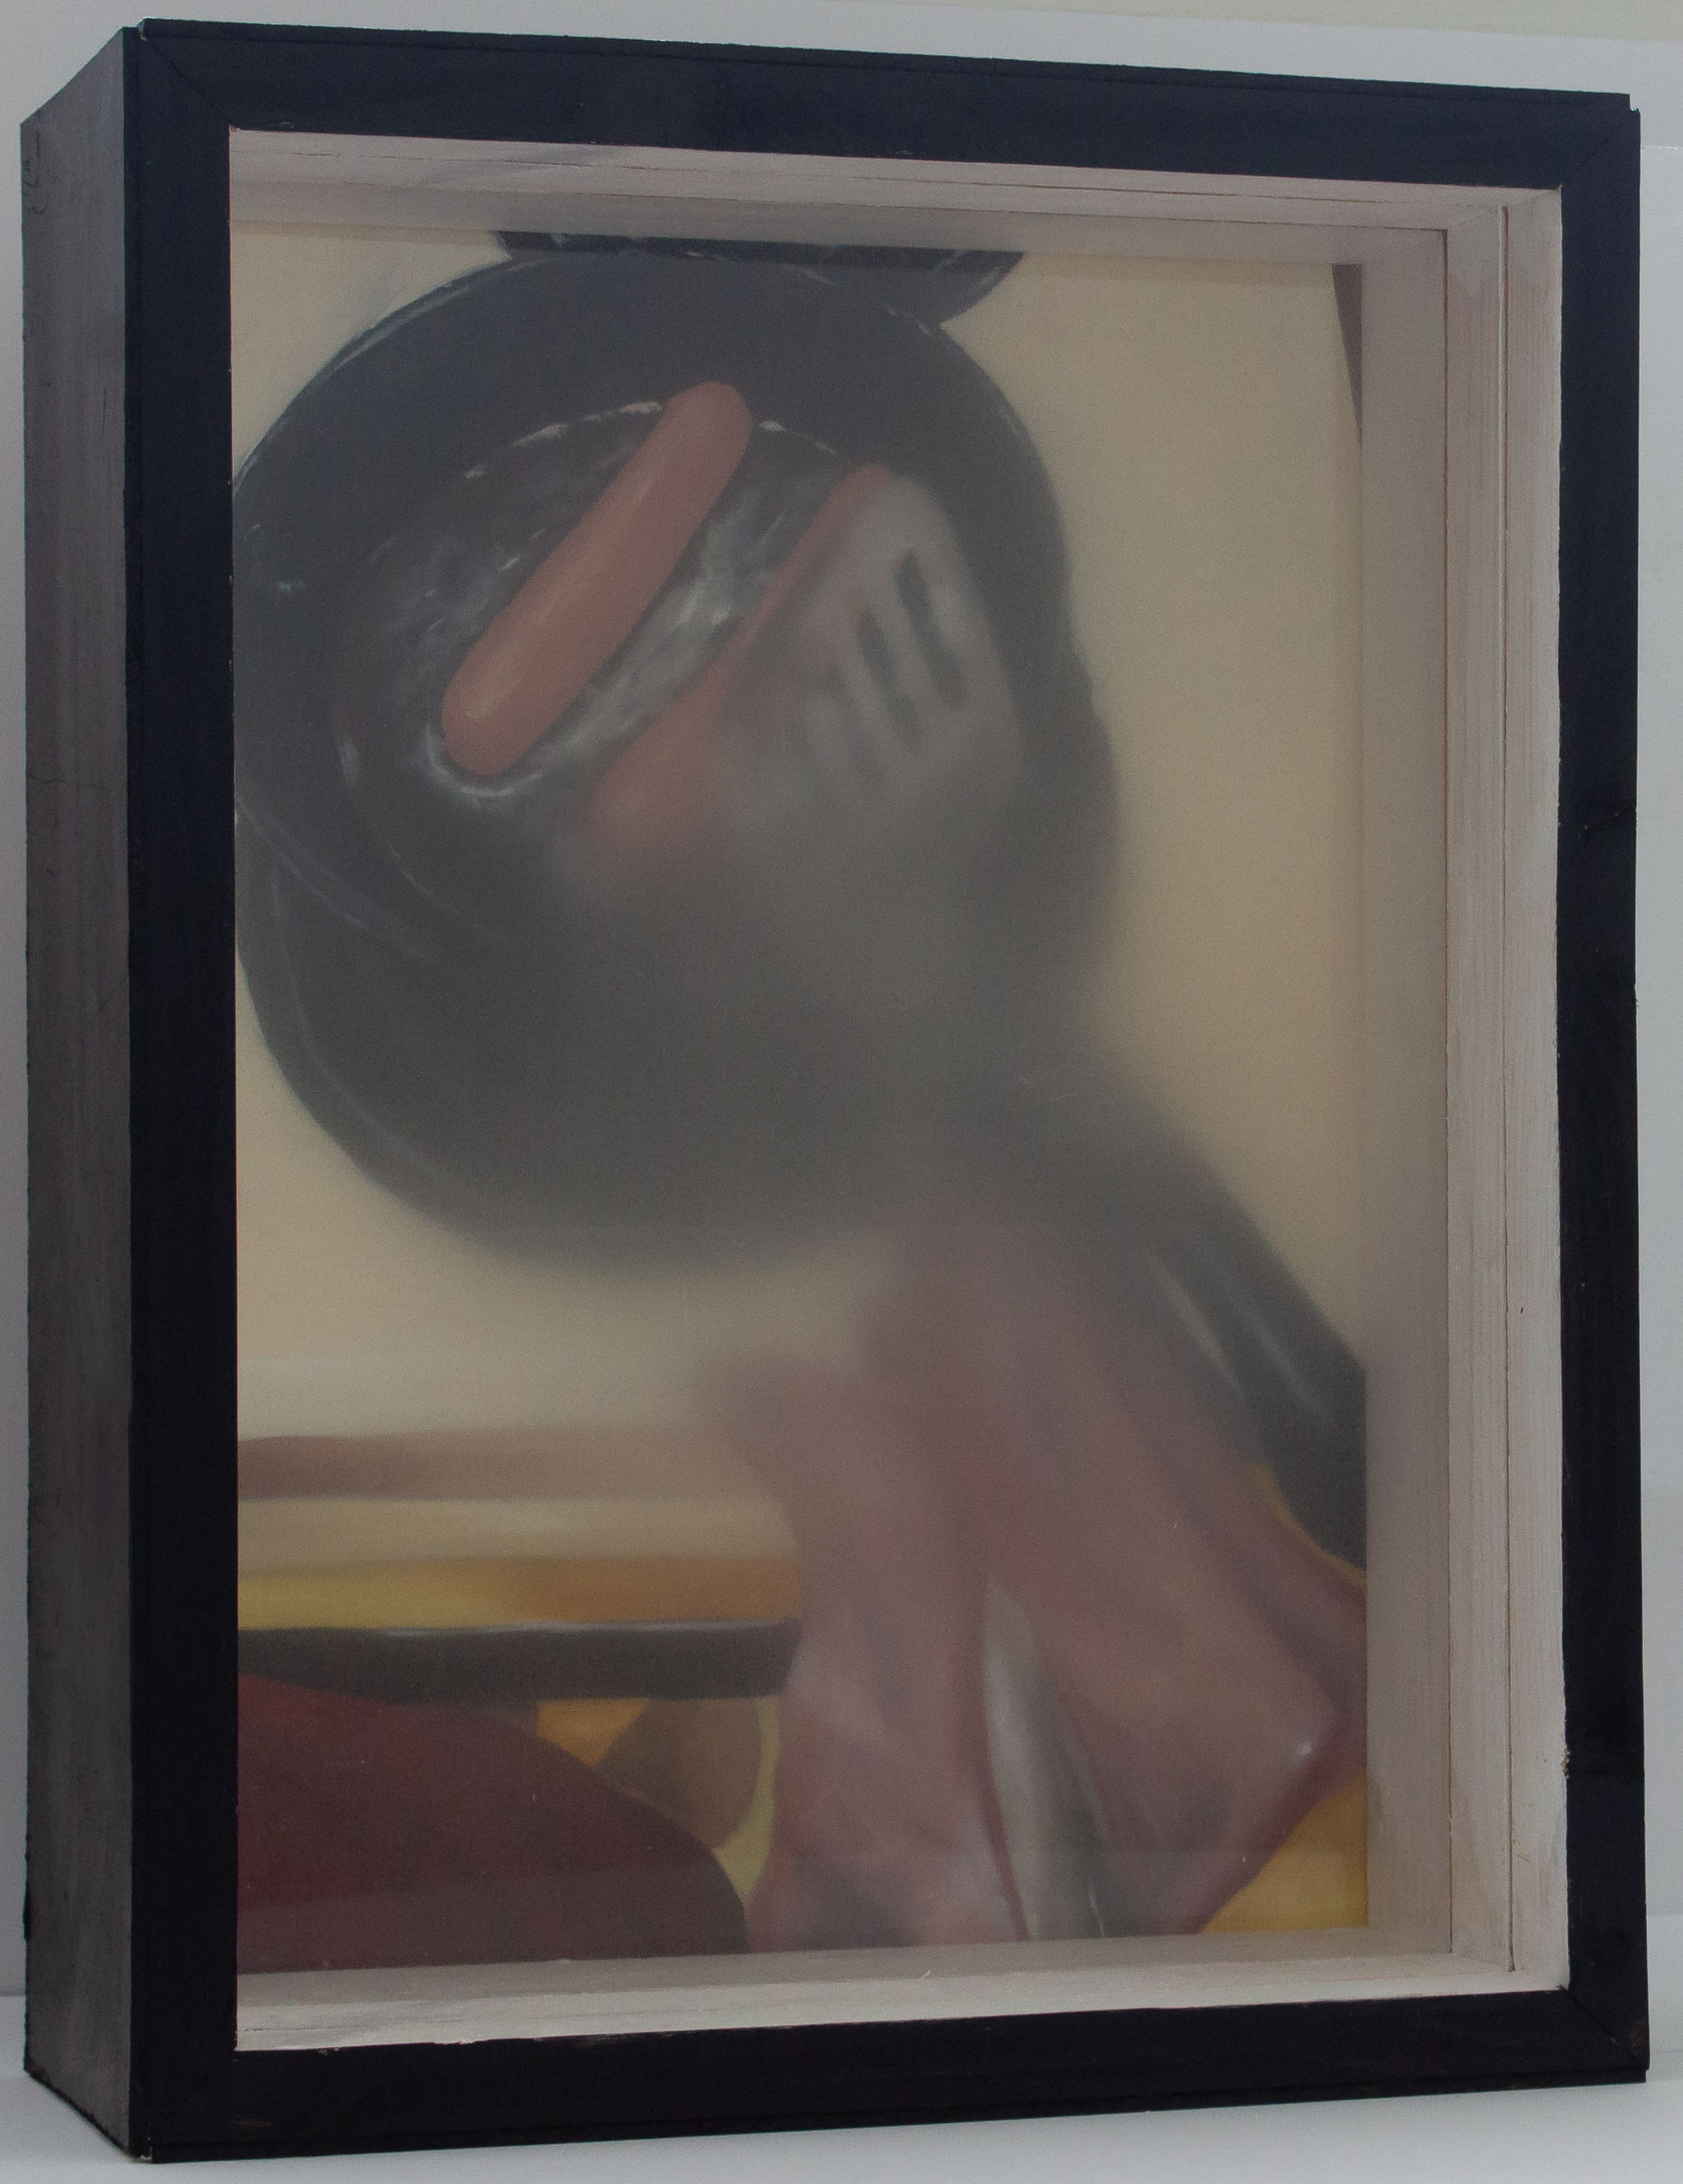 A box with a painting in the back and treated plexiglass panels interfering with the view of the painting. The painting shows an older person’s hand as they cook two hotdogs on a skillet. The person is holding a spatula. They are wearing a red shirt. The stove top surrounding the eye being used is visible. The front panel is slid out from the box. The back panel is still obscuring the painting. The back panel of plexiglass is rough, scratched, and blurry. Both panels are blurry more in the center and fade out.